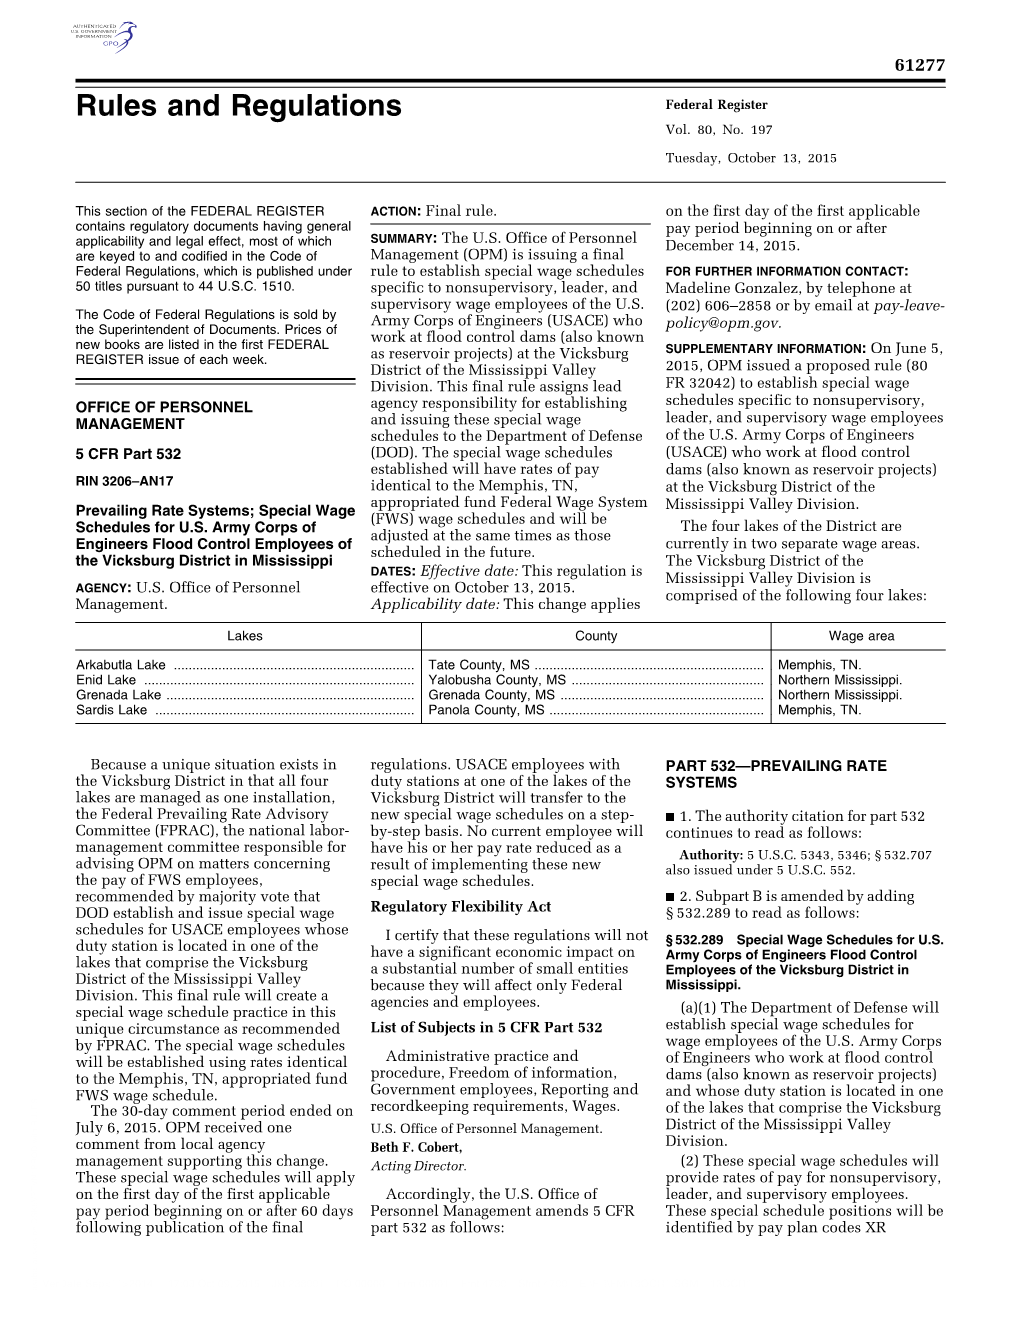 Rules and Regulations Federal Register Vol